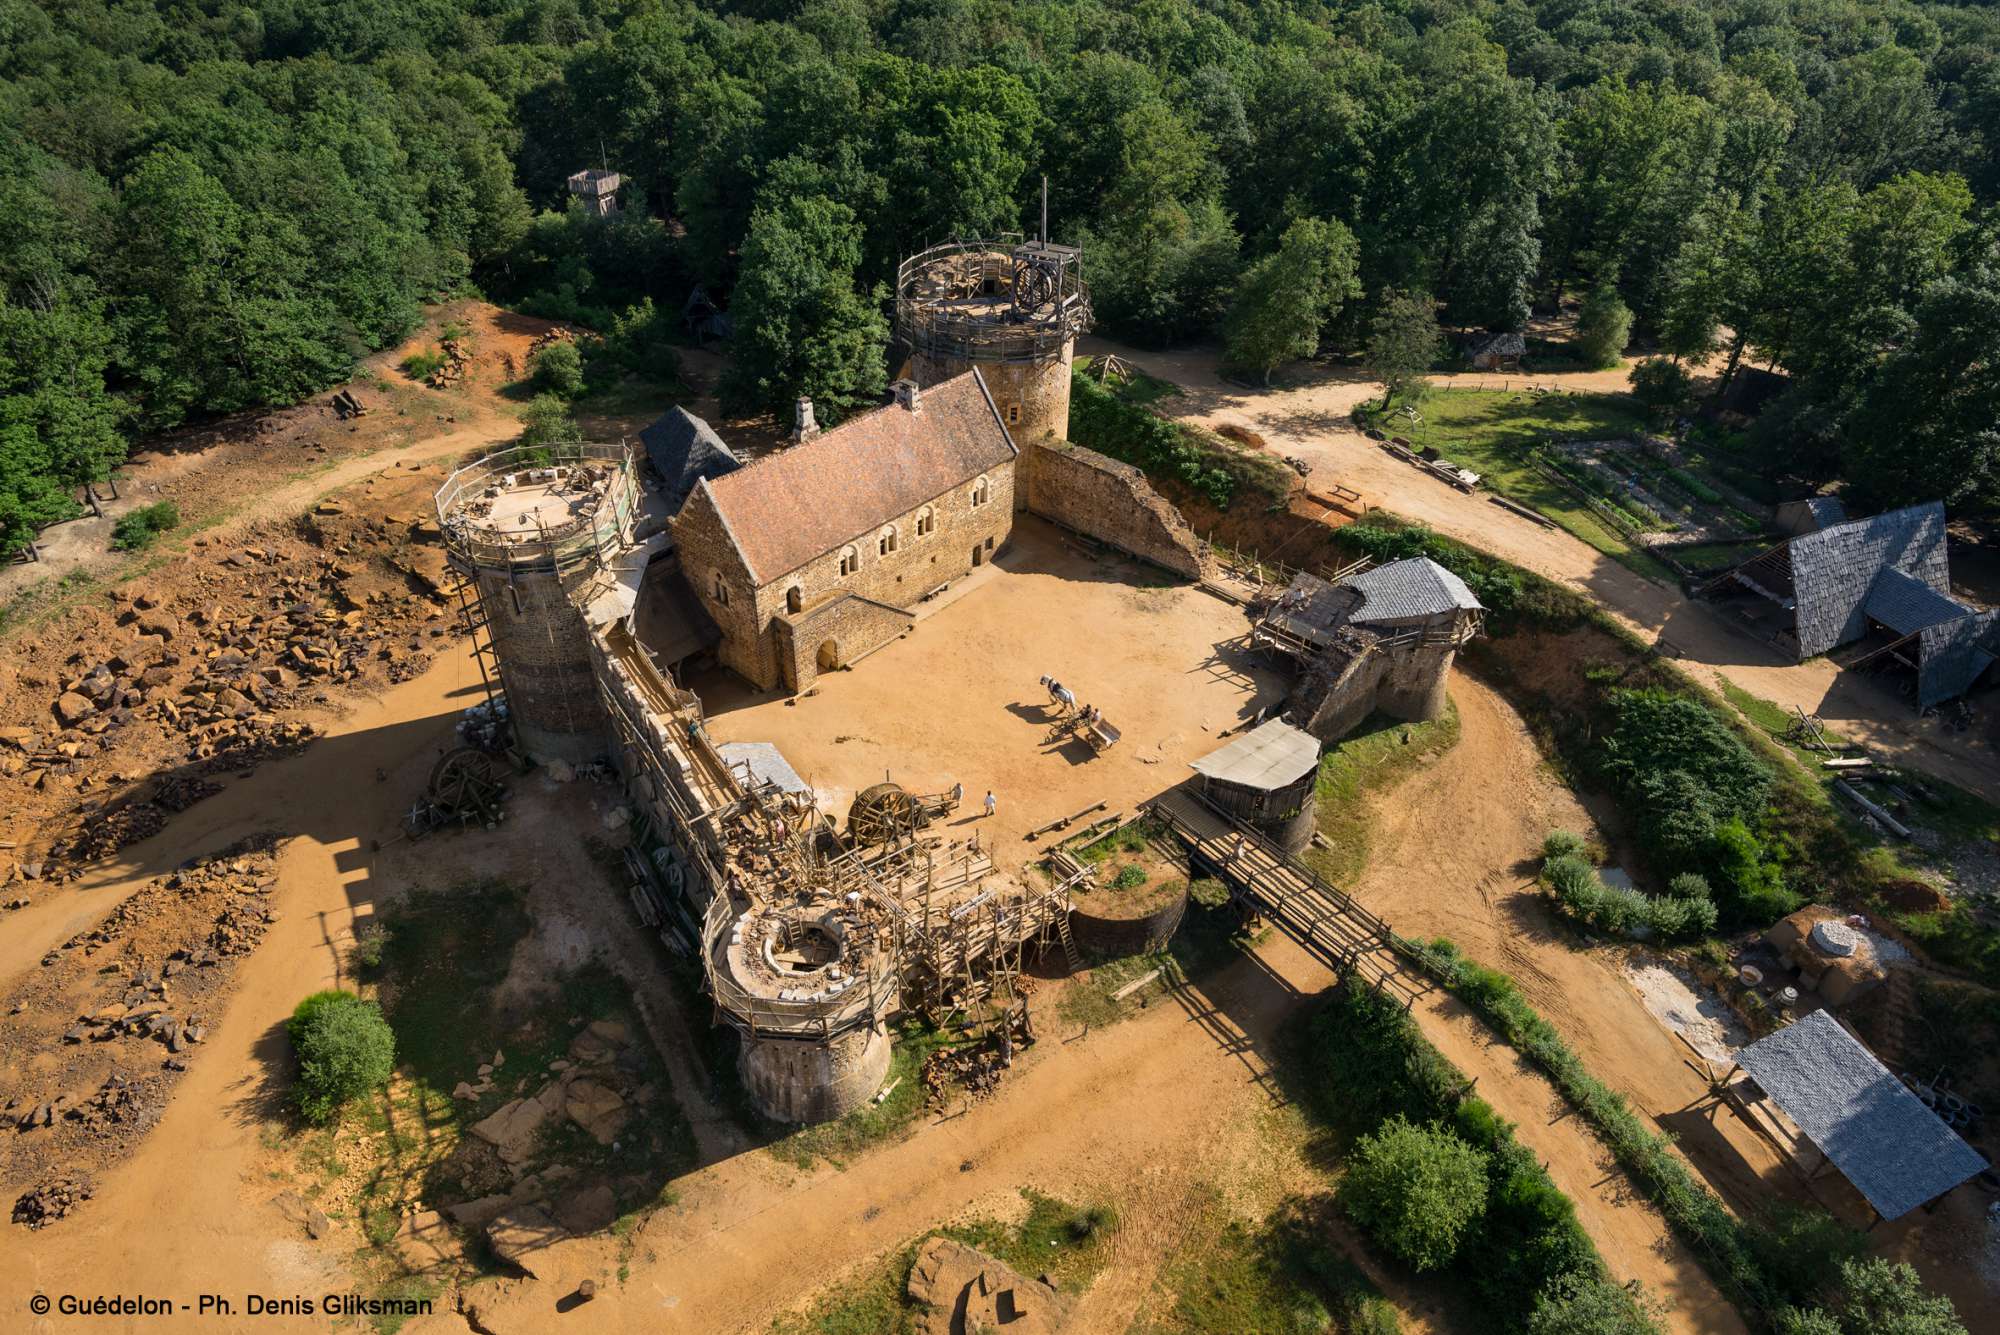 The French Have Been Building This Incredible Medieval Castle For 20